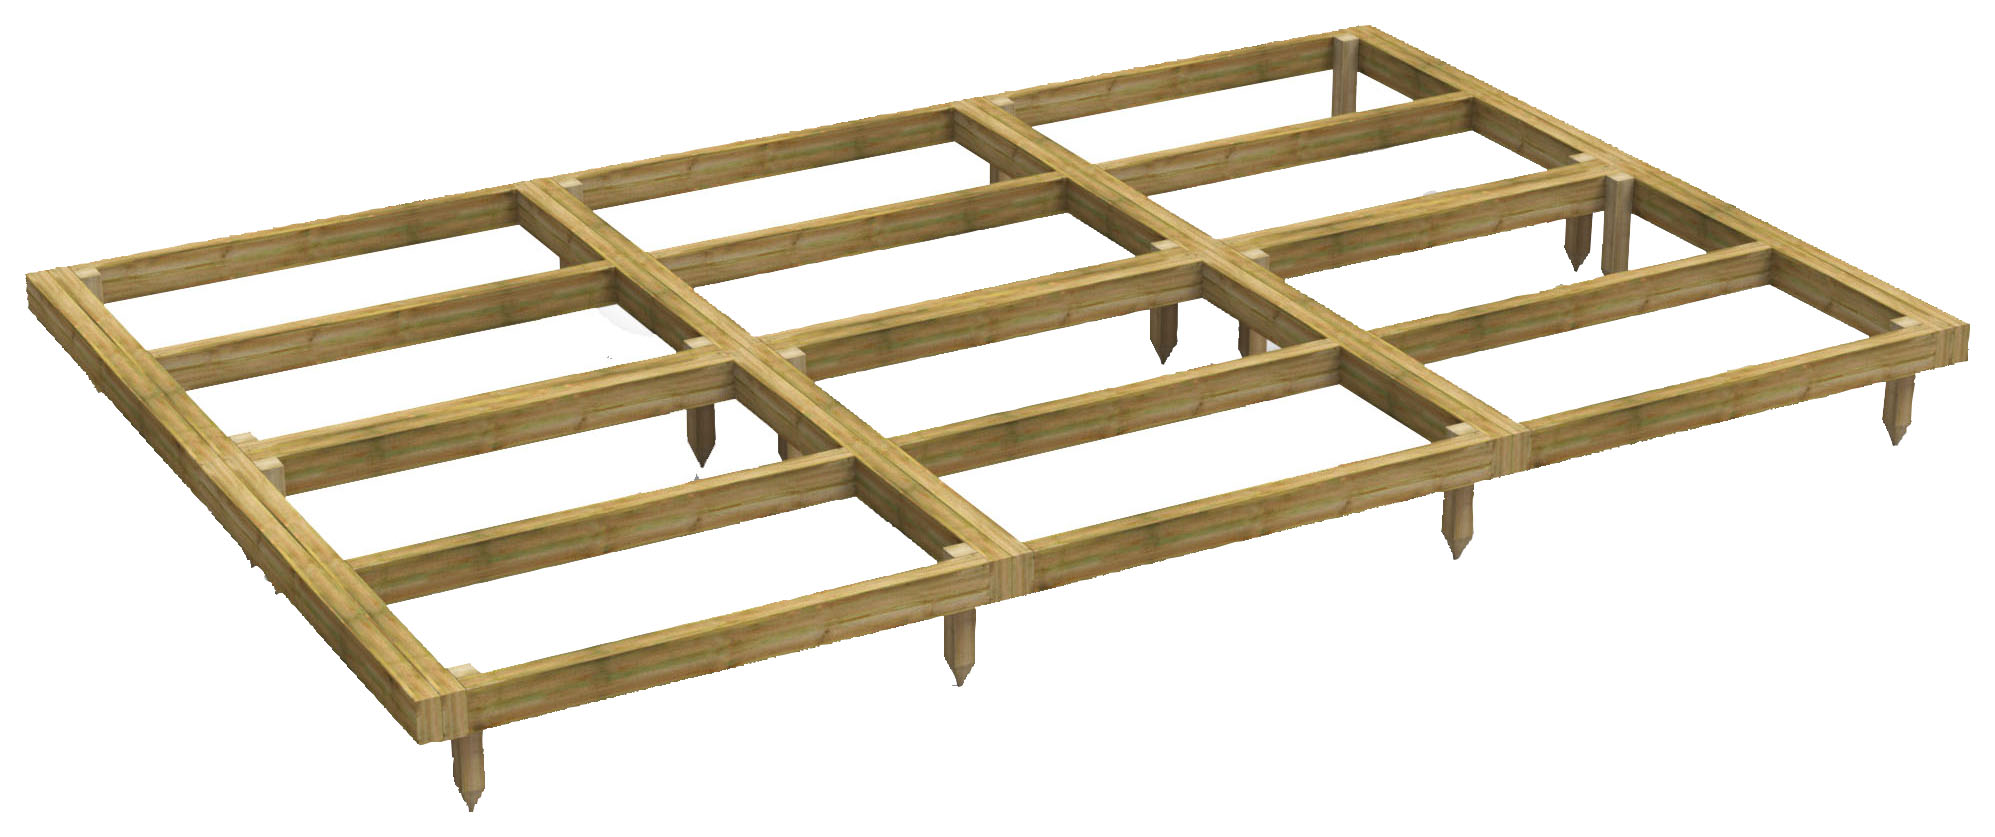 Image of Power Sheds 12 x 8ft Pressure Treated Garden Building Base Kit